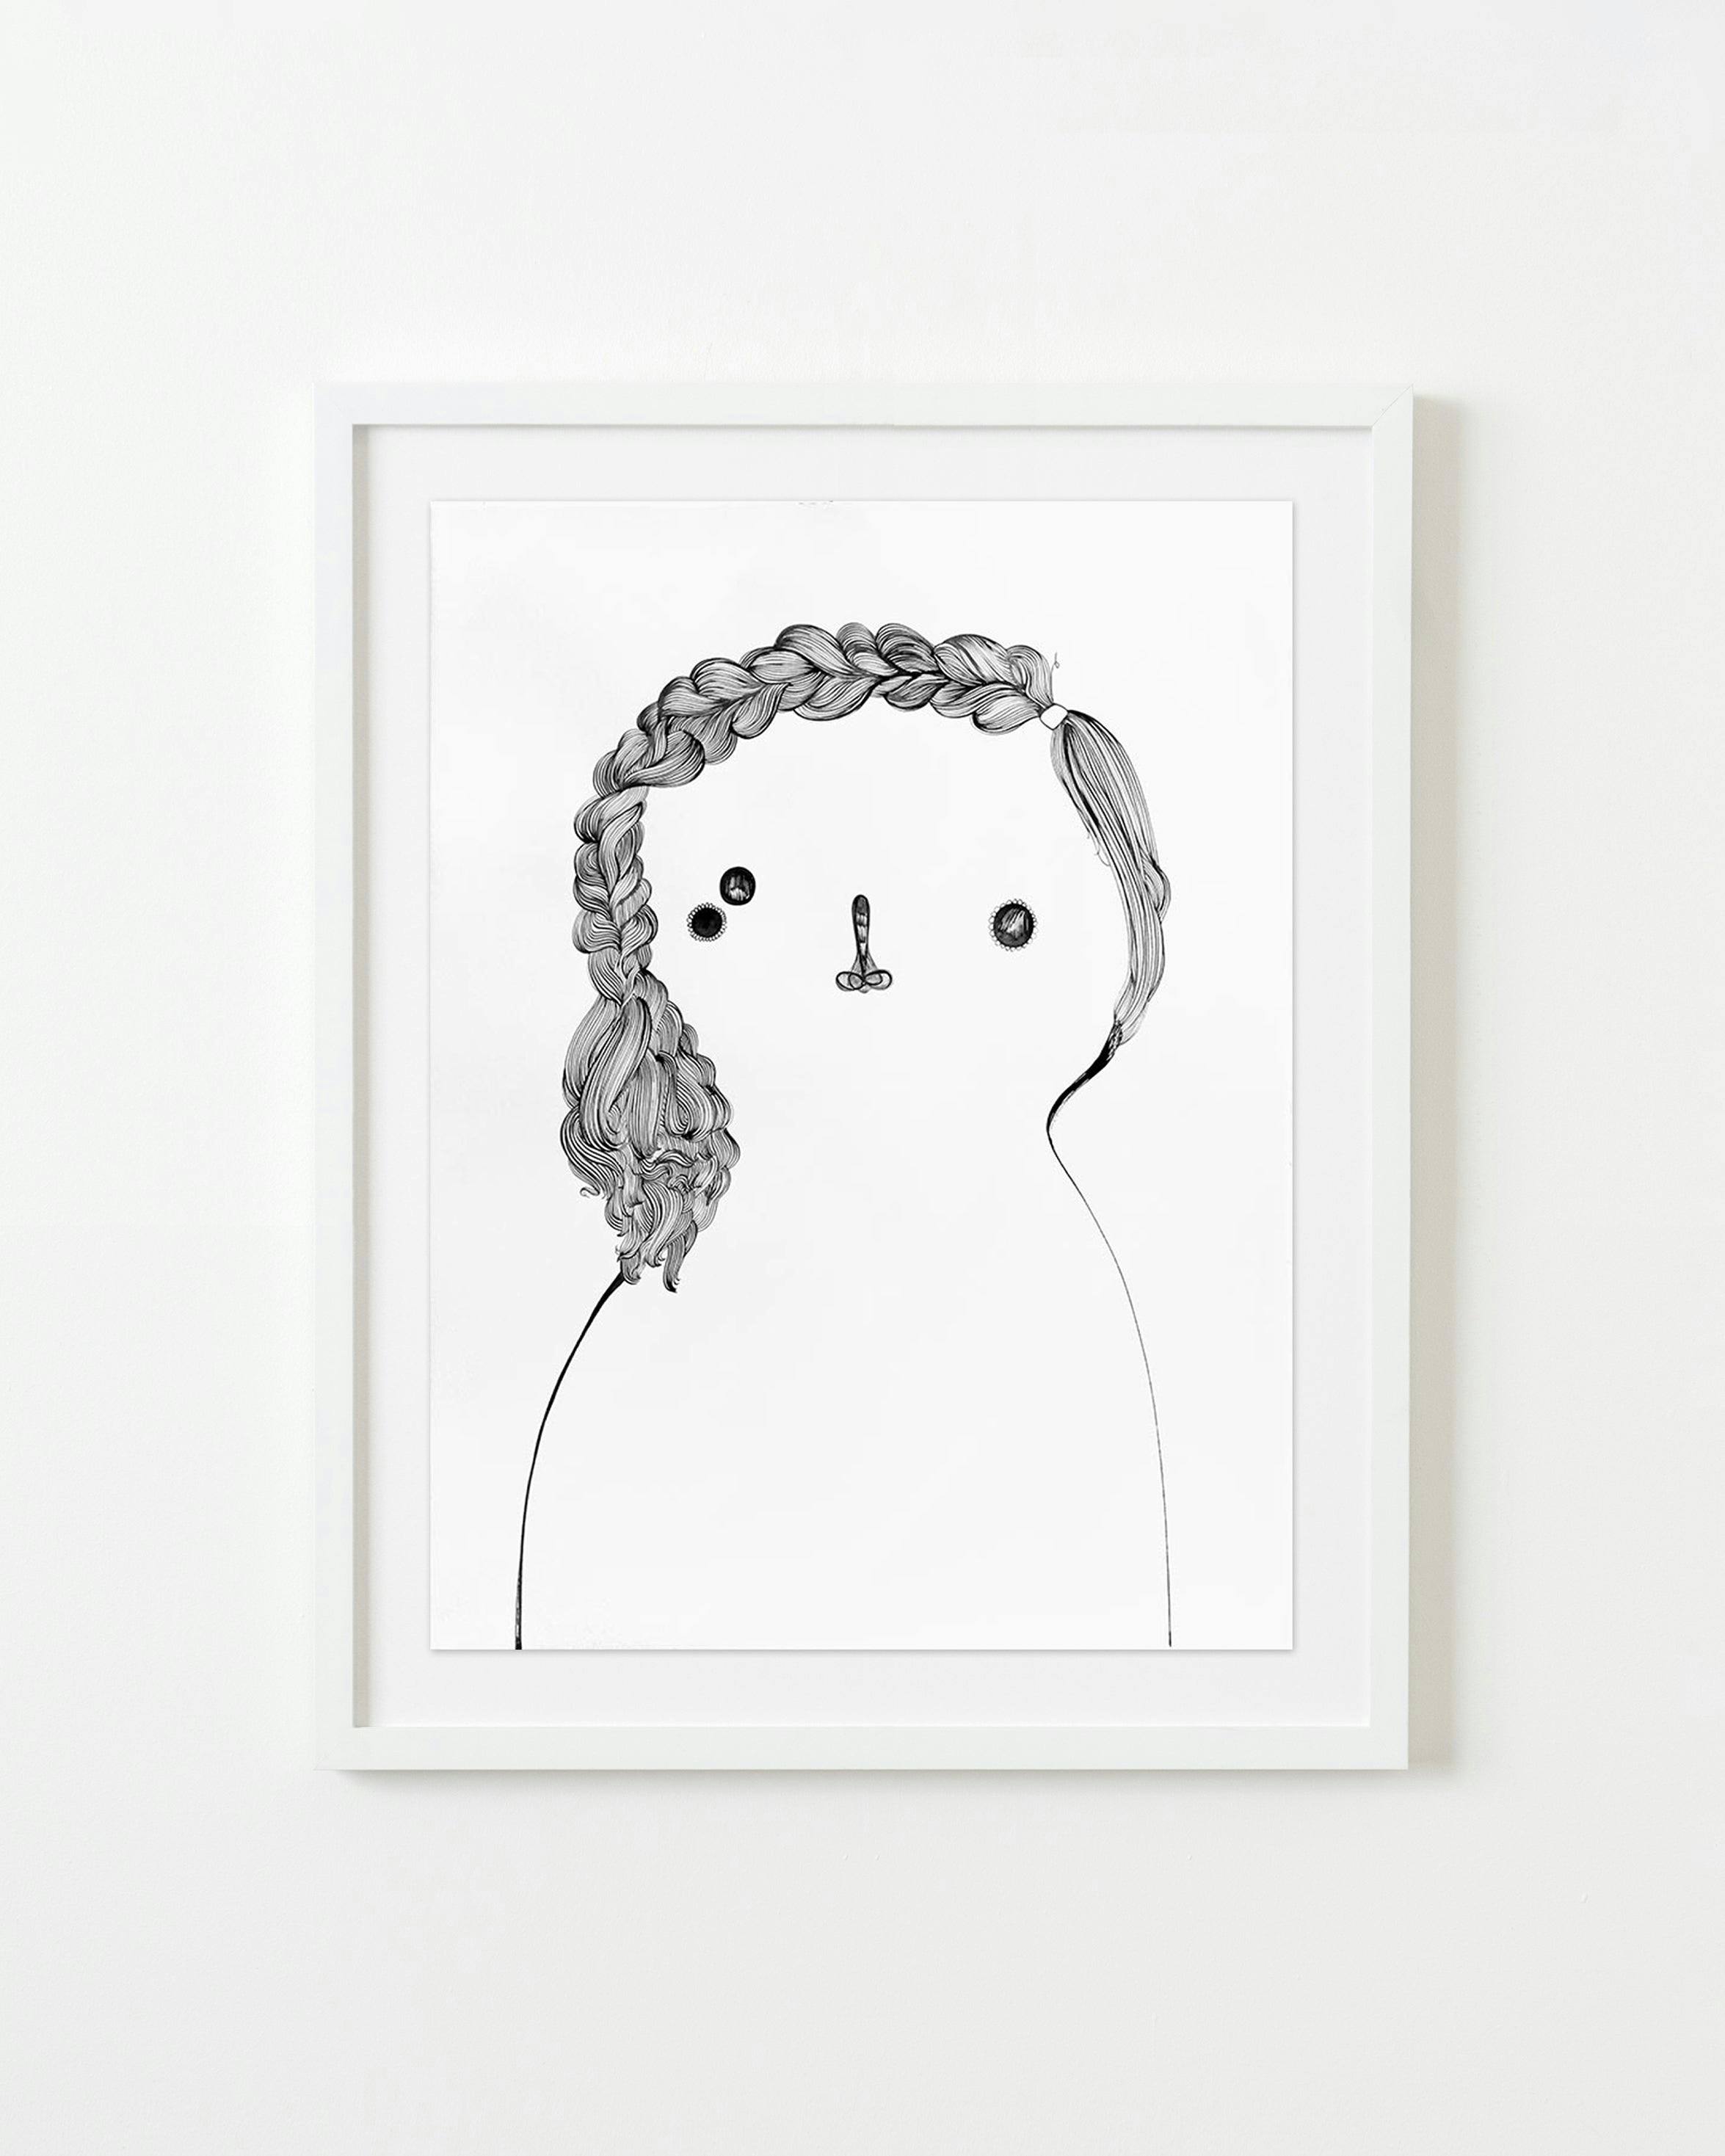 Drawing by Rebeca Raney titled "Hair Drawing #06".